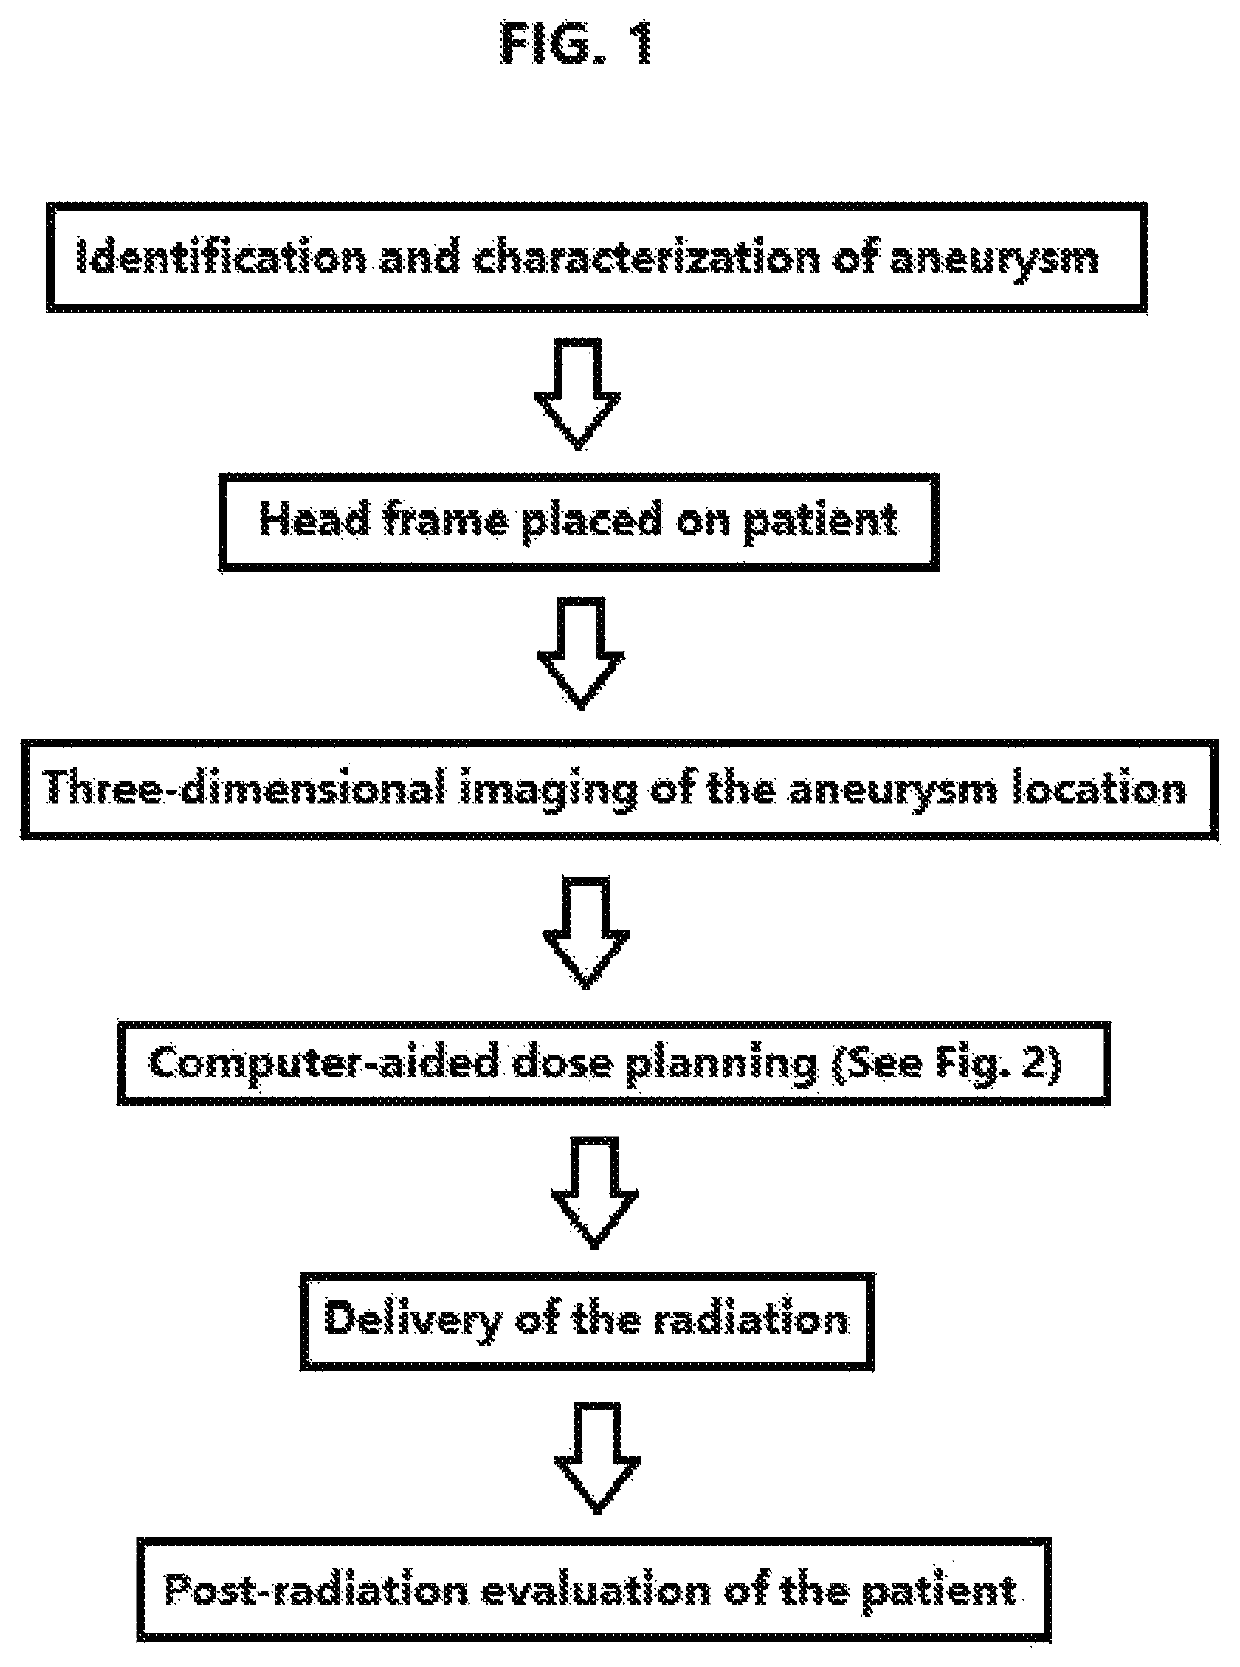 Treatment of unruptured saccular intracranial aneurysms using stereotactic radiosurgery